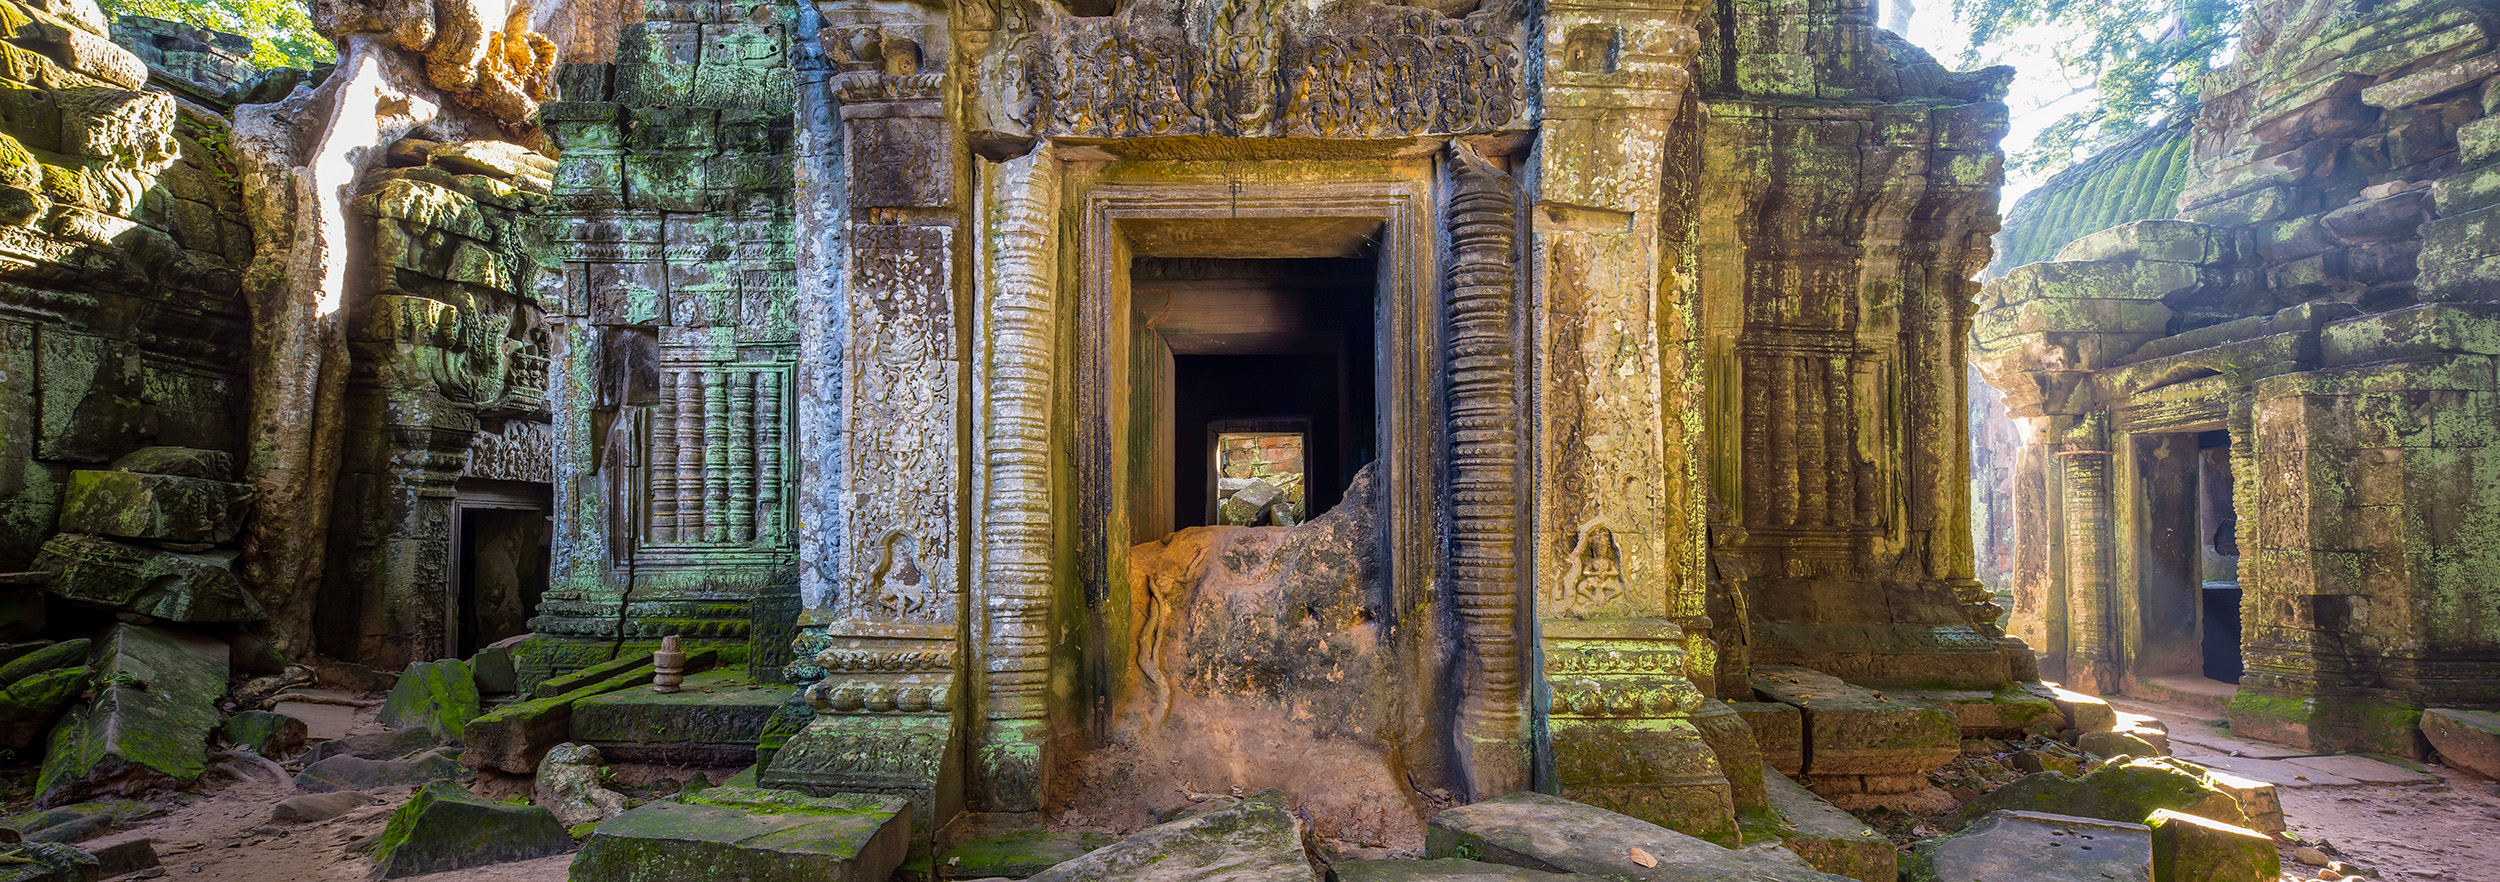 This striking three-image panoramic shot captures the essence of the Ta Prohm temple complex in Cambodia, evoking memories of...